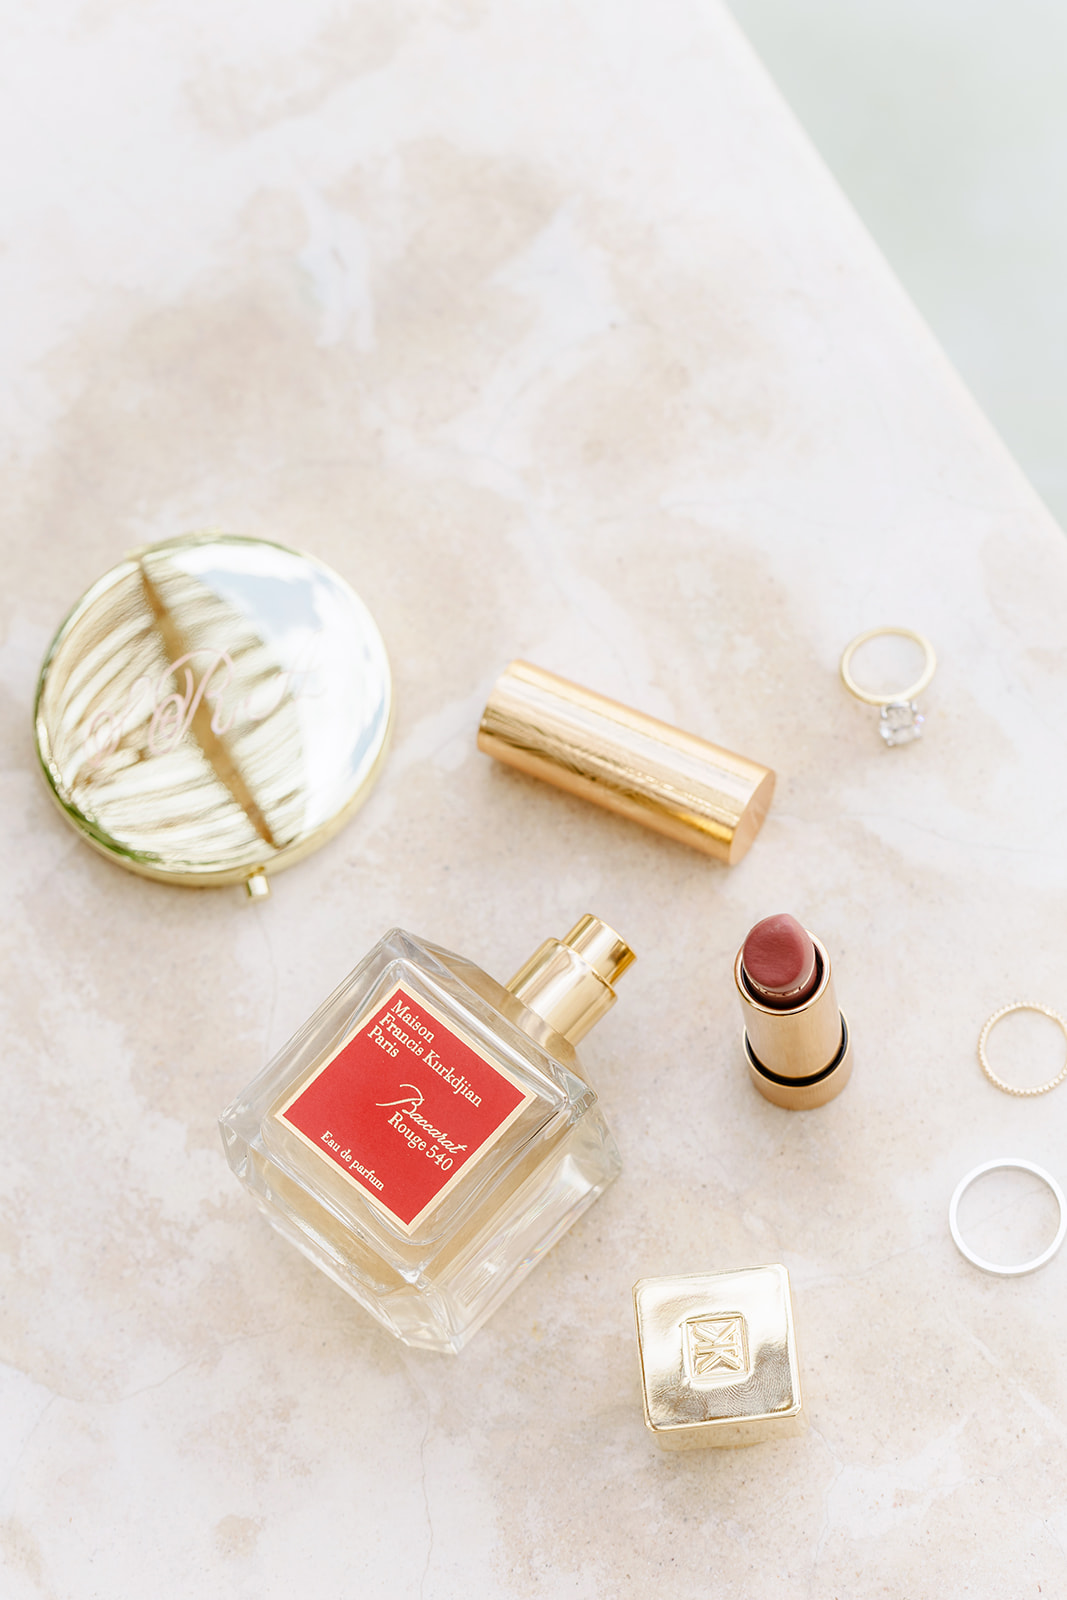 Luxury bridal perfume, lipstick, and gold compact for getting ready